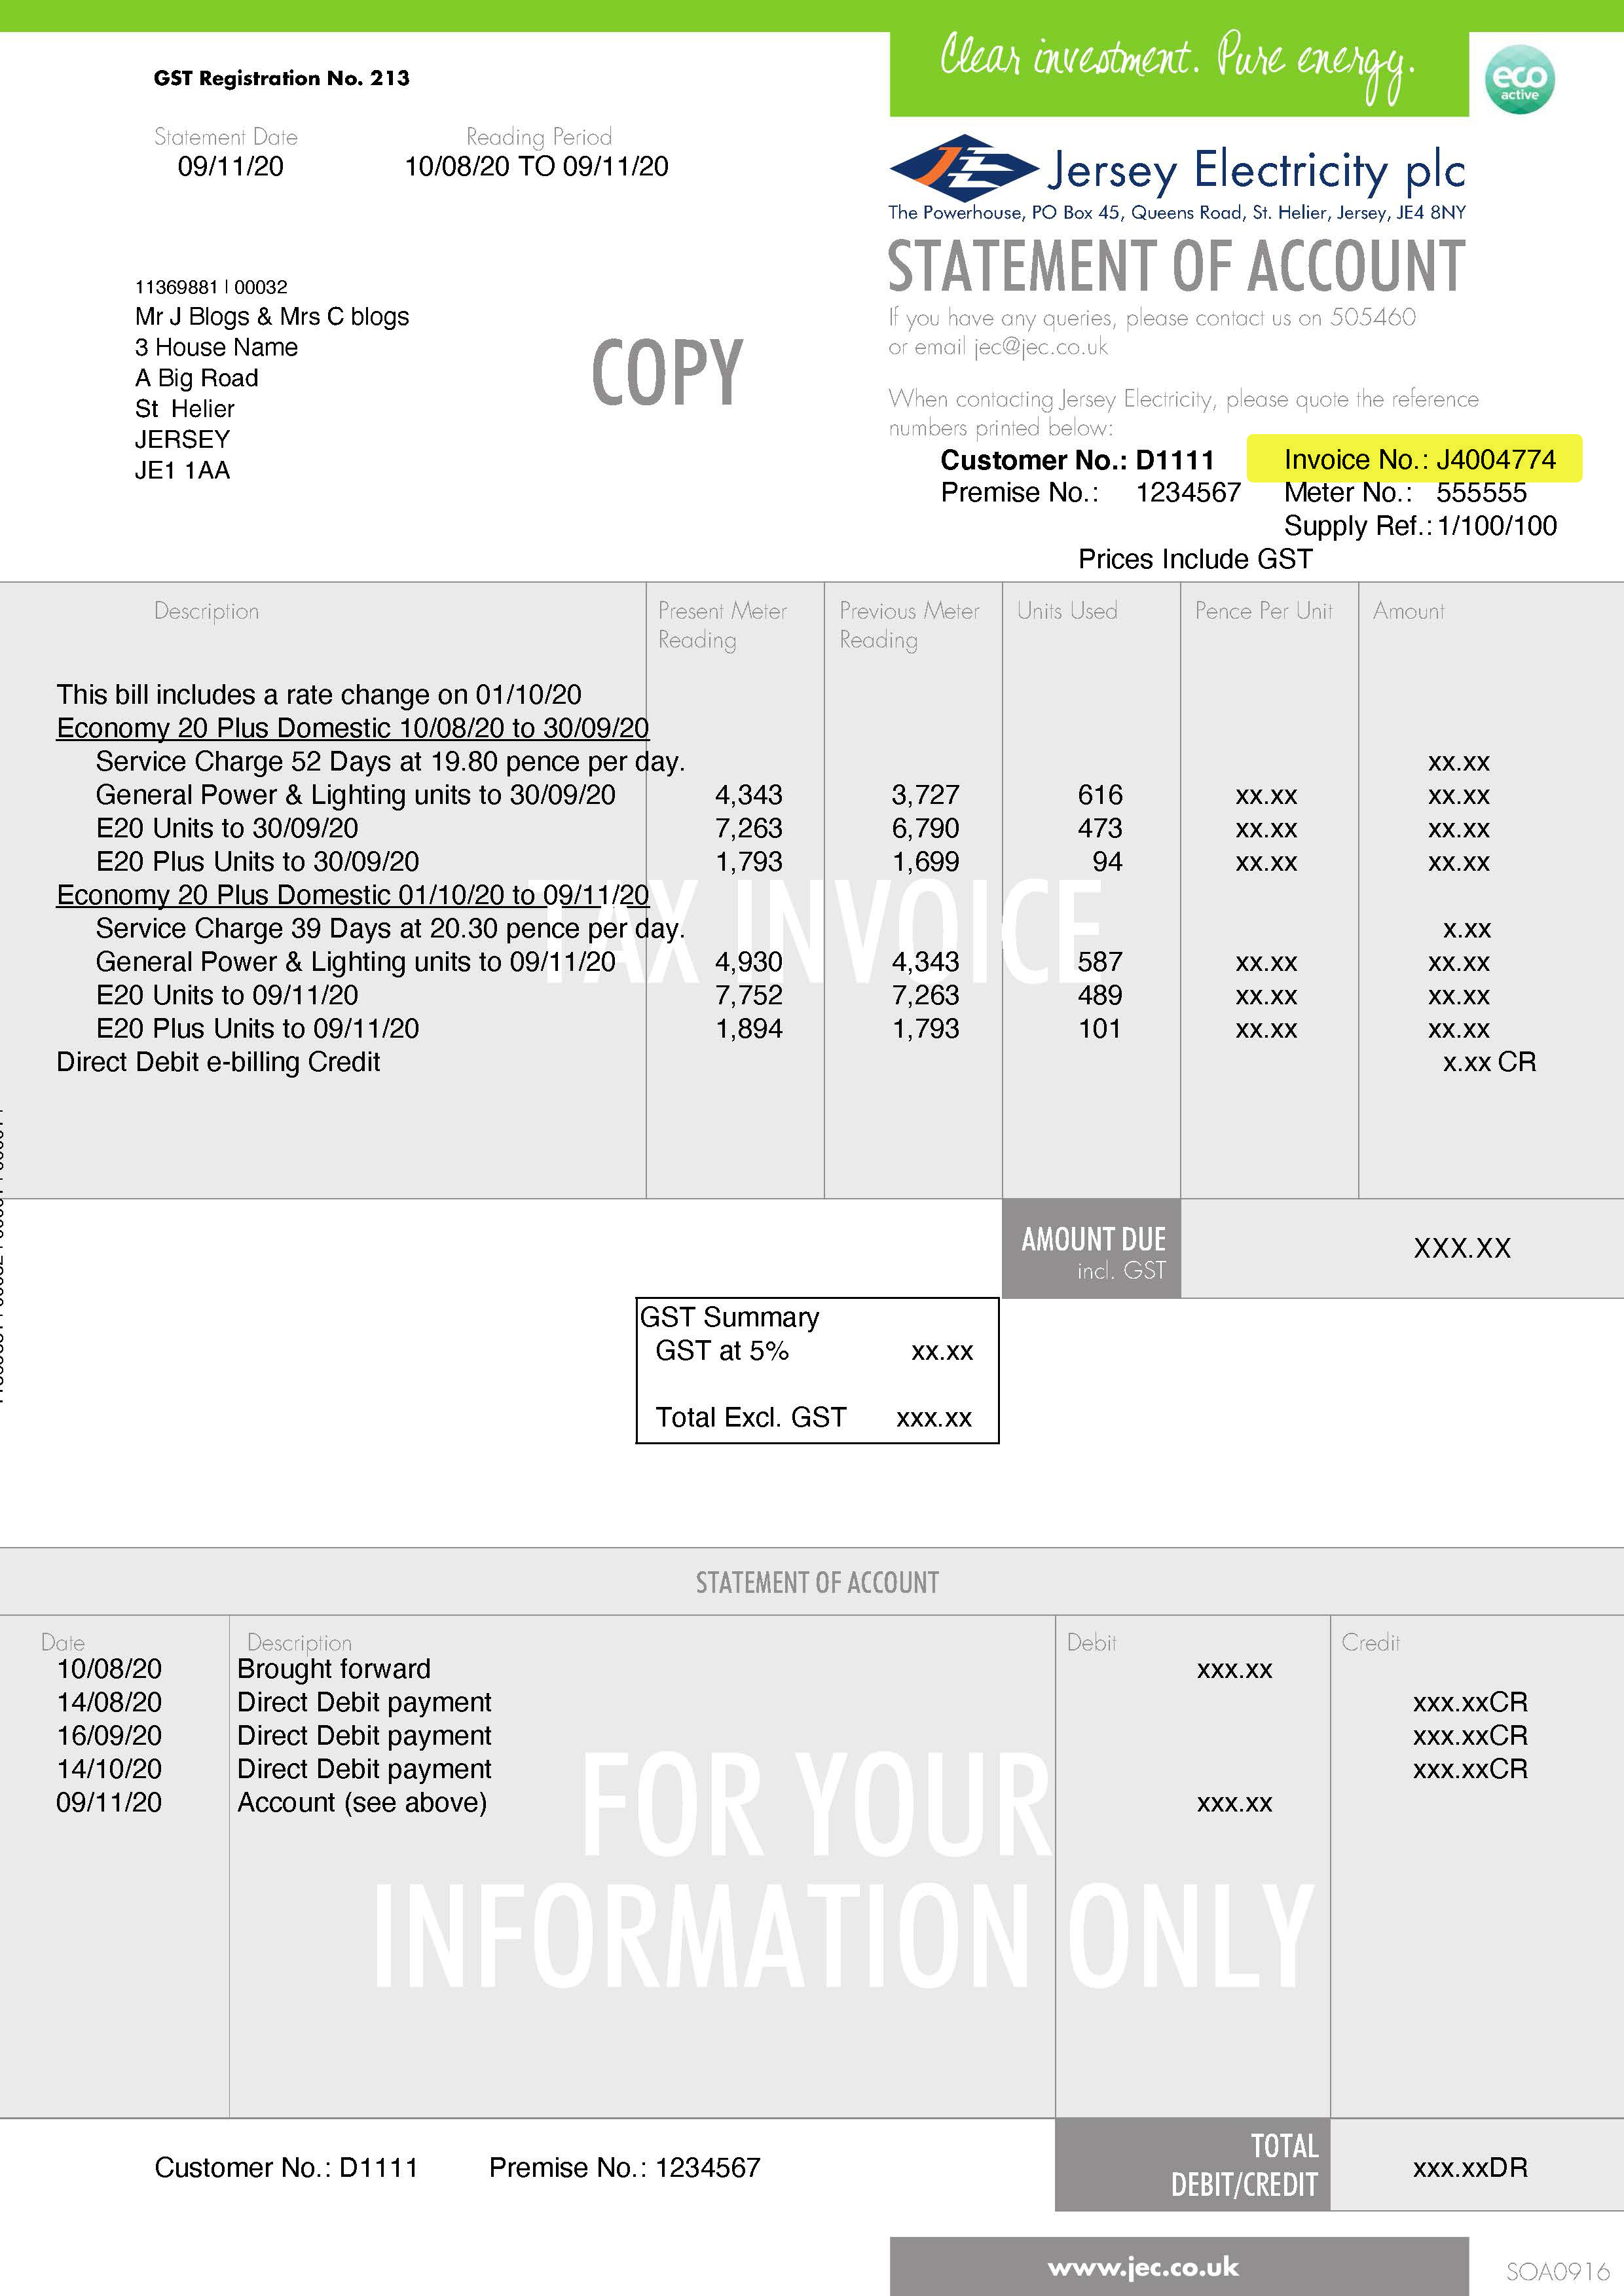 Example electricity bill with invoice number